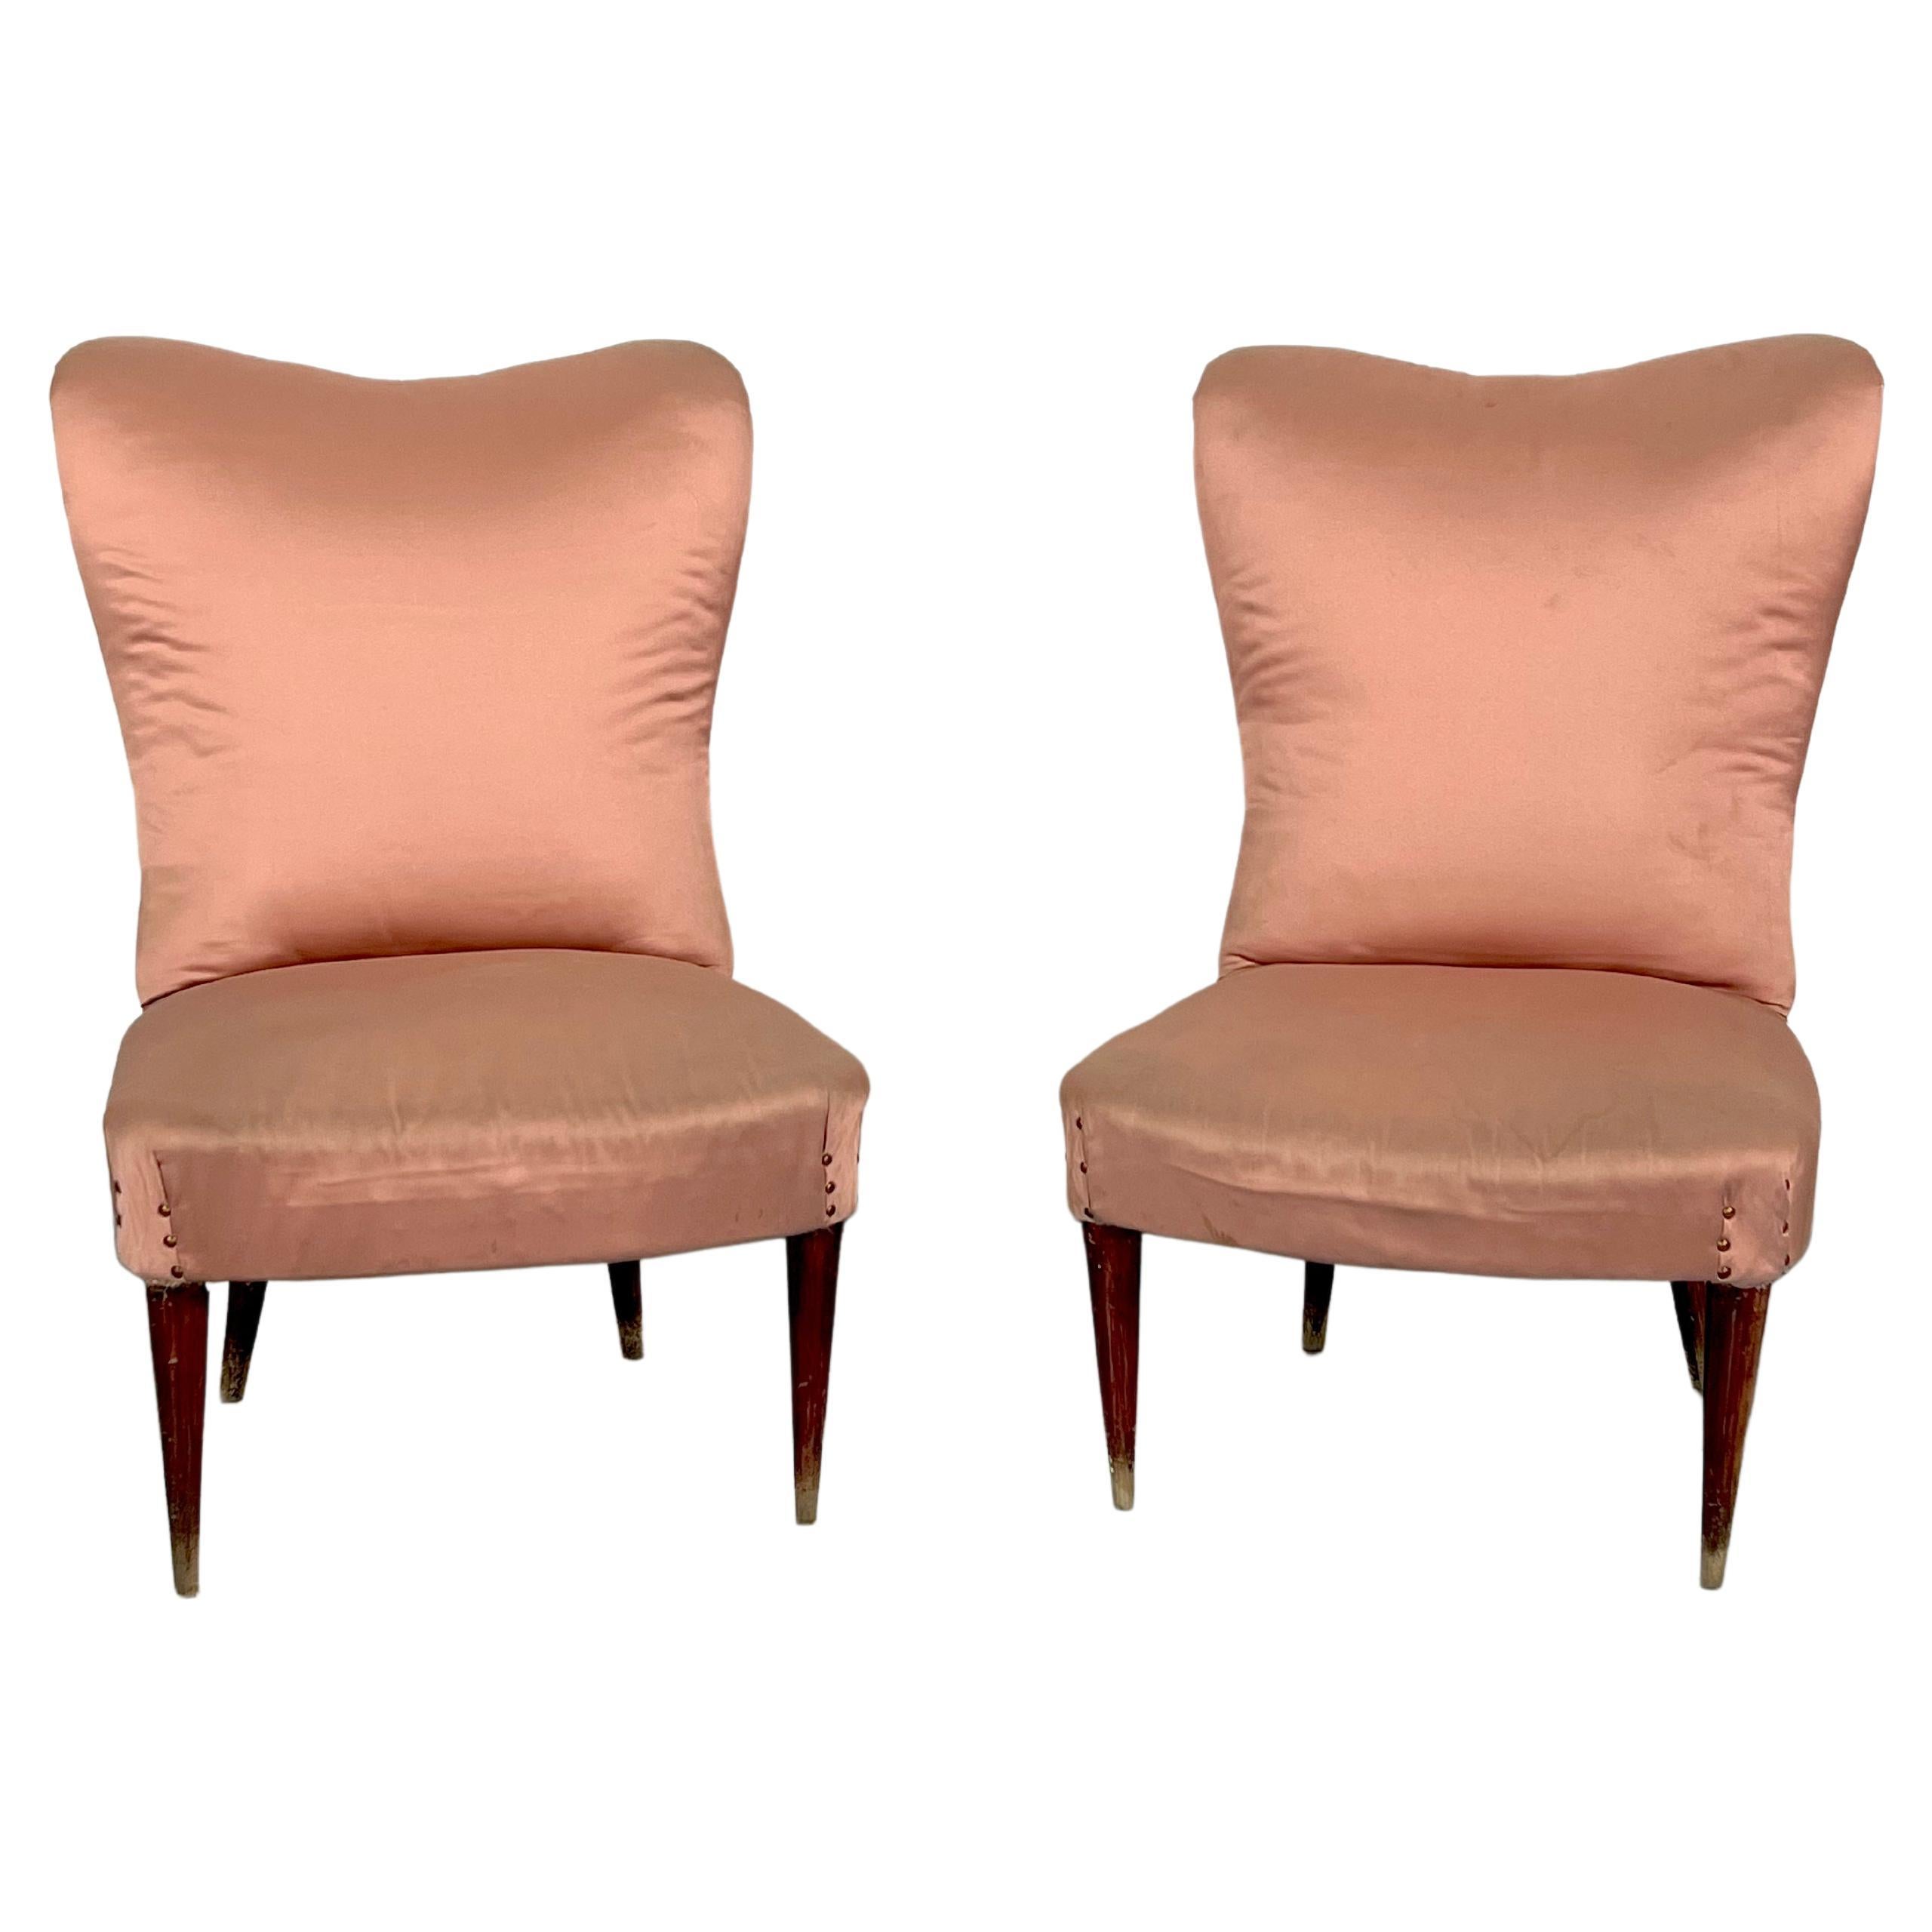 Italian Vintage Pair of Club Armchairs in the Manner of Gio Ponti, 1950s